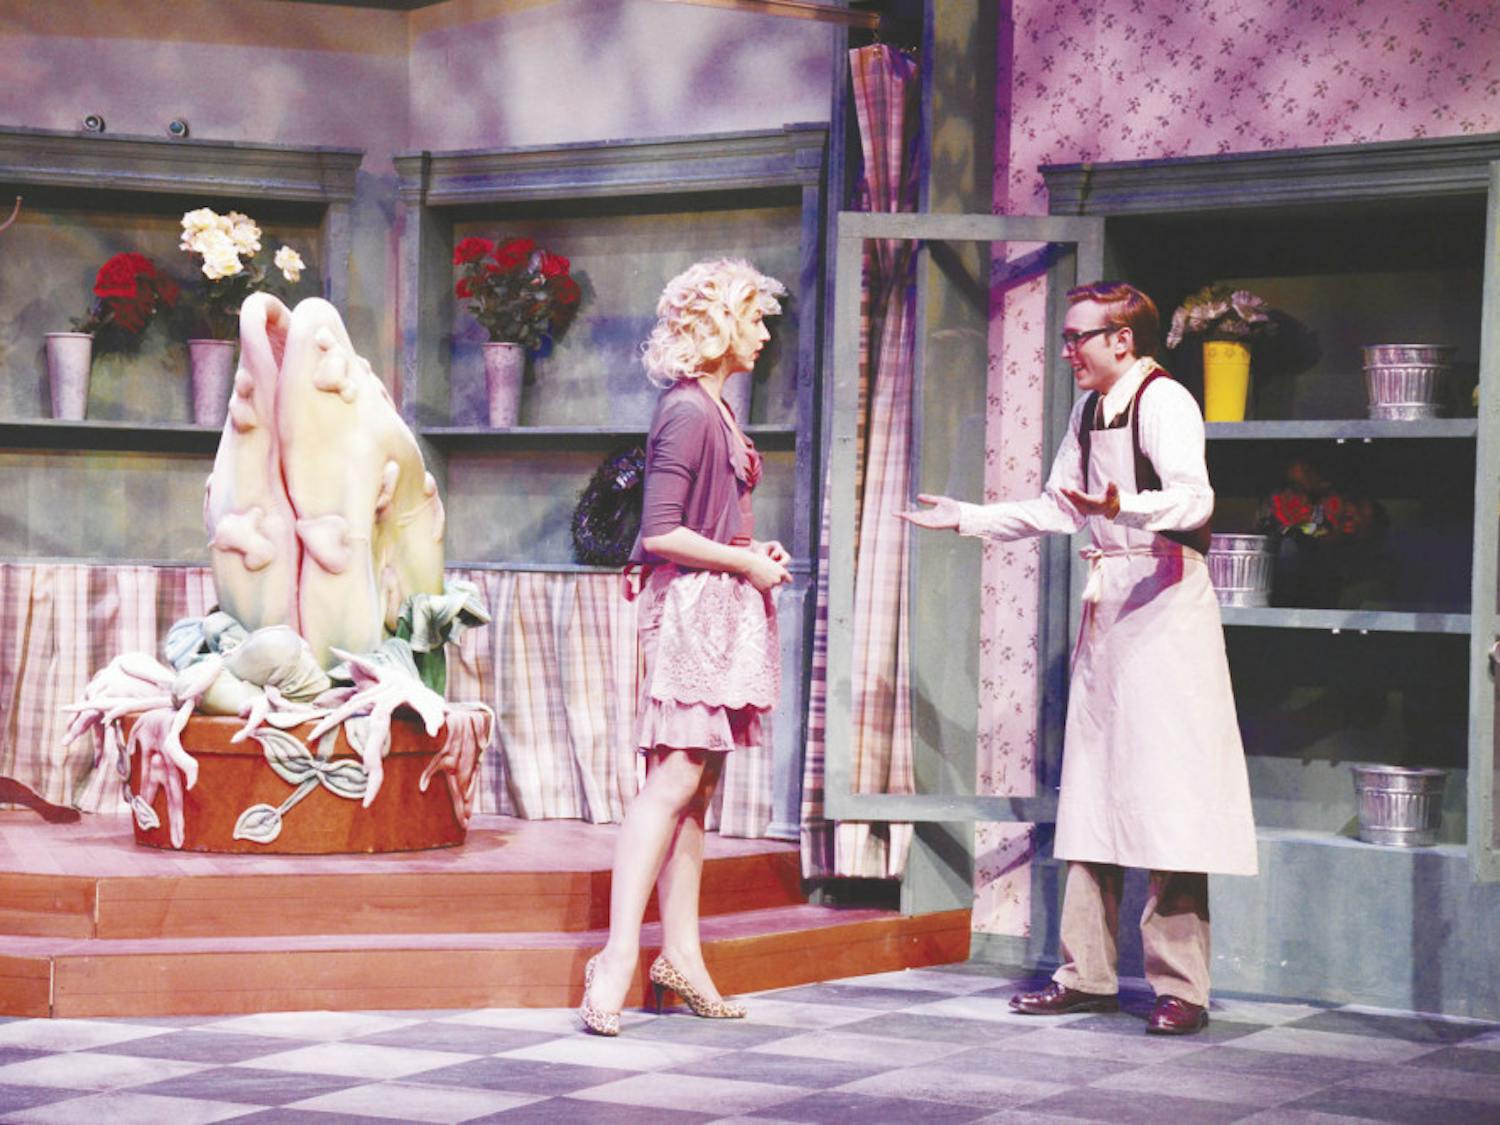 Recap of the "Little Shop of Horrors" play